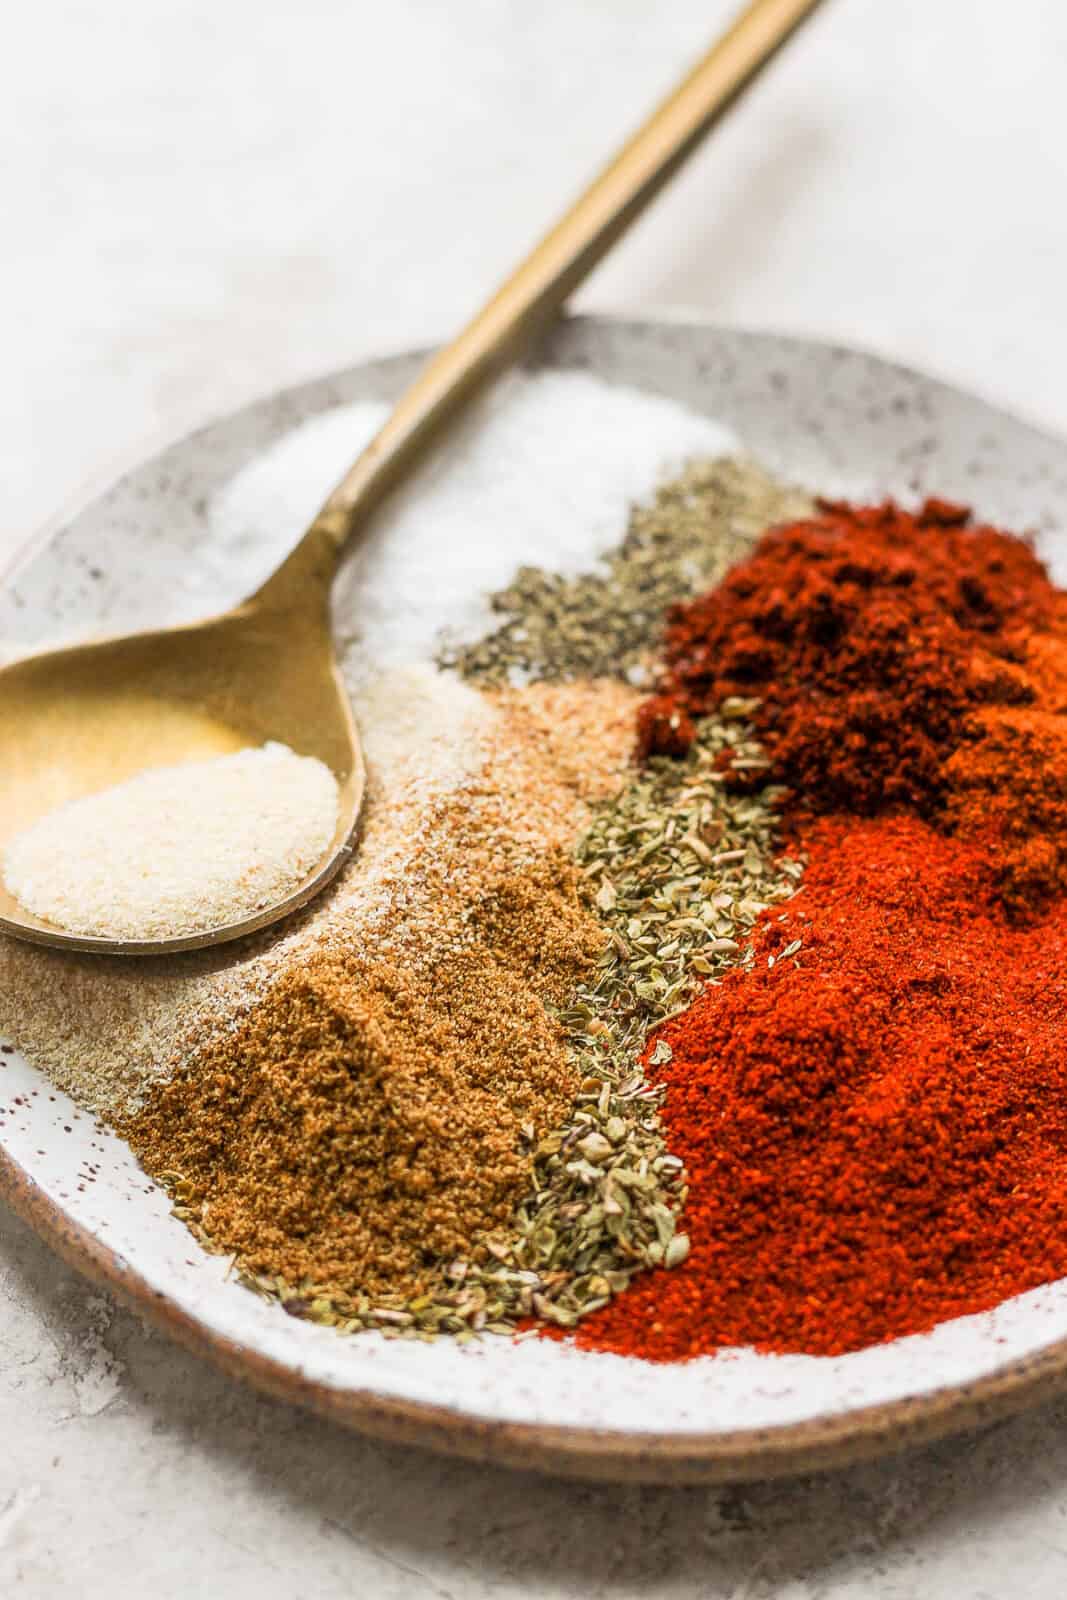 Homemade chipotle seasoning ingredients on a plate with a spoon.